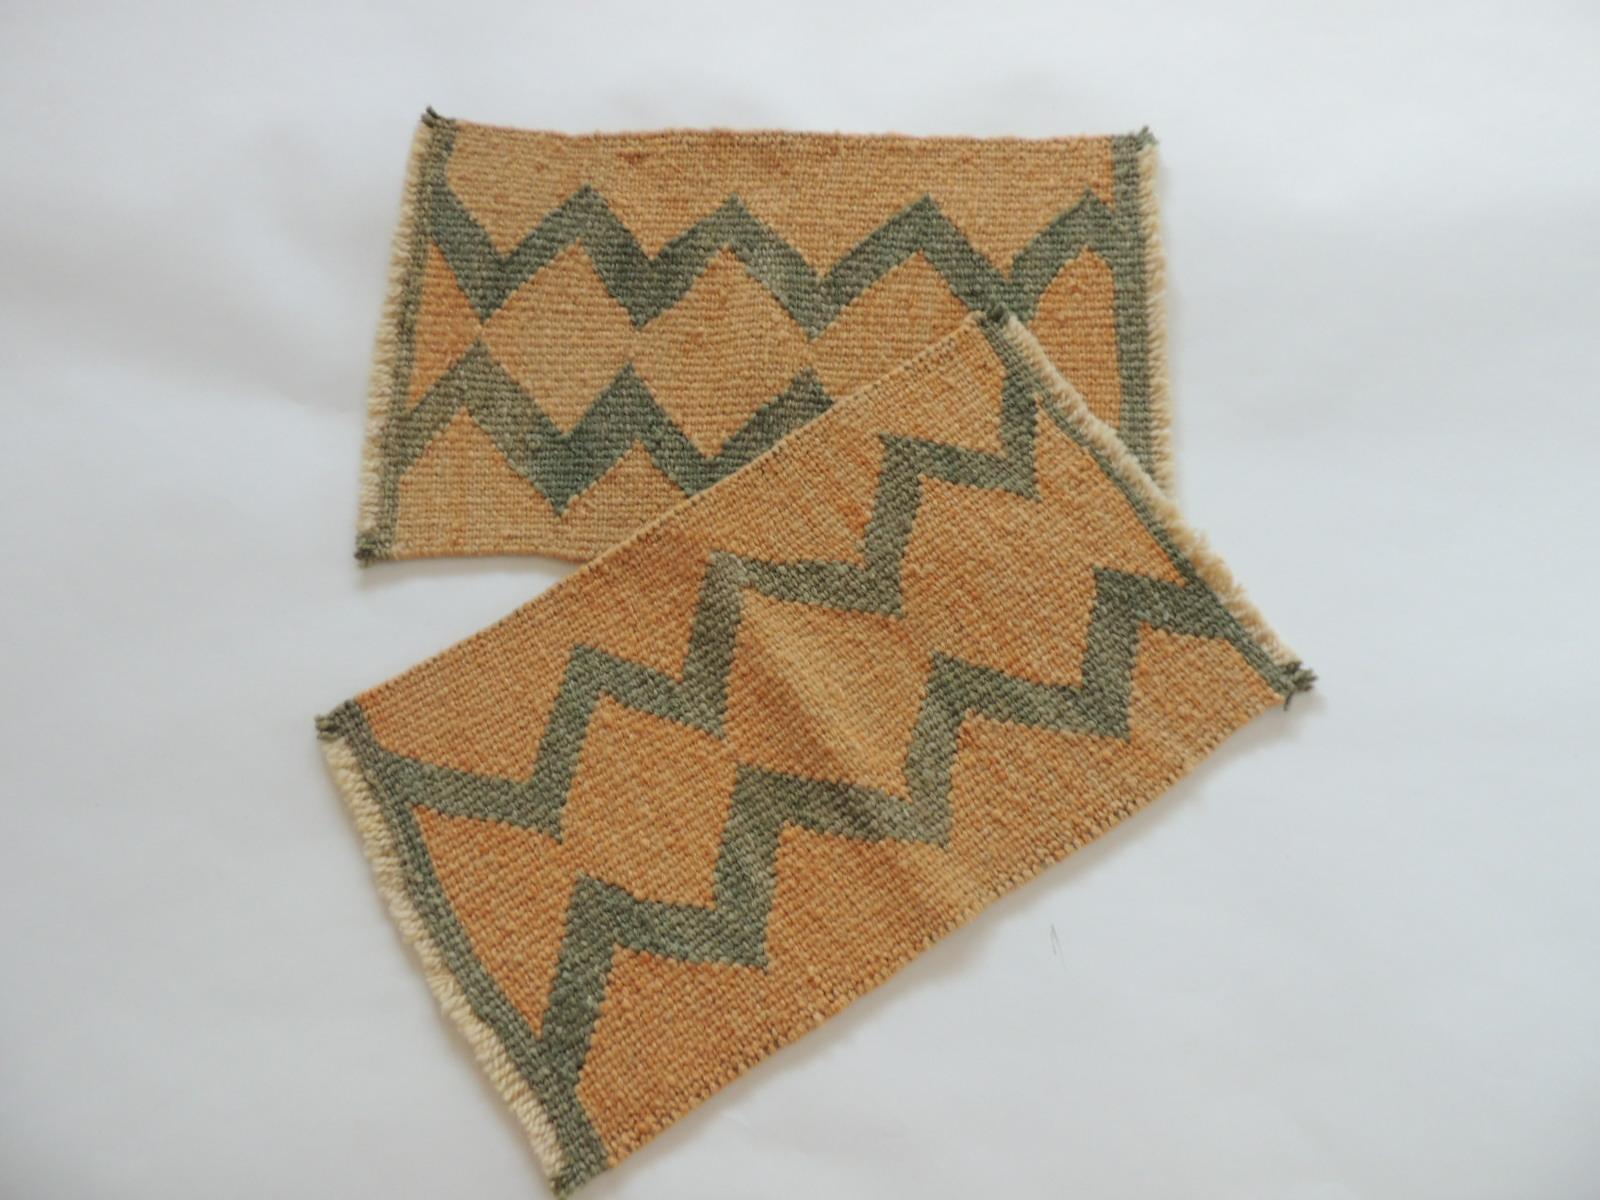 Vintage pale orange and green woven rug samples.
Woven zig-zag pattern and fringes.
Ideal to frame or make them in to pillows.
Size: 11